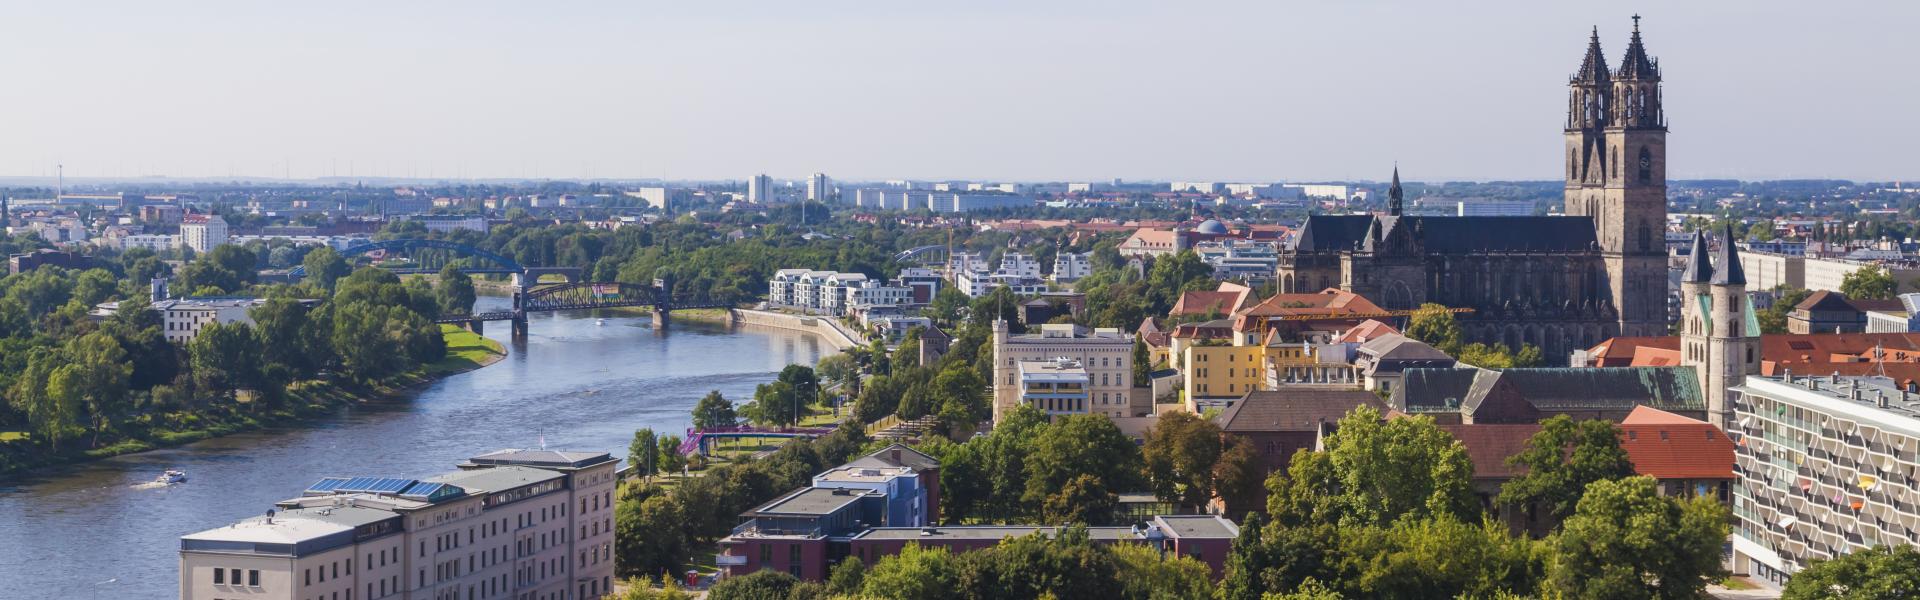 Magdeburg Scenic View